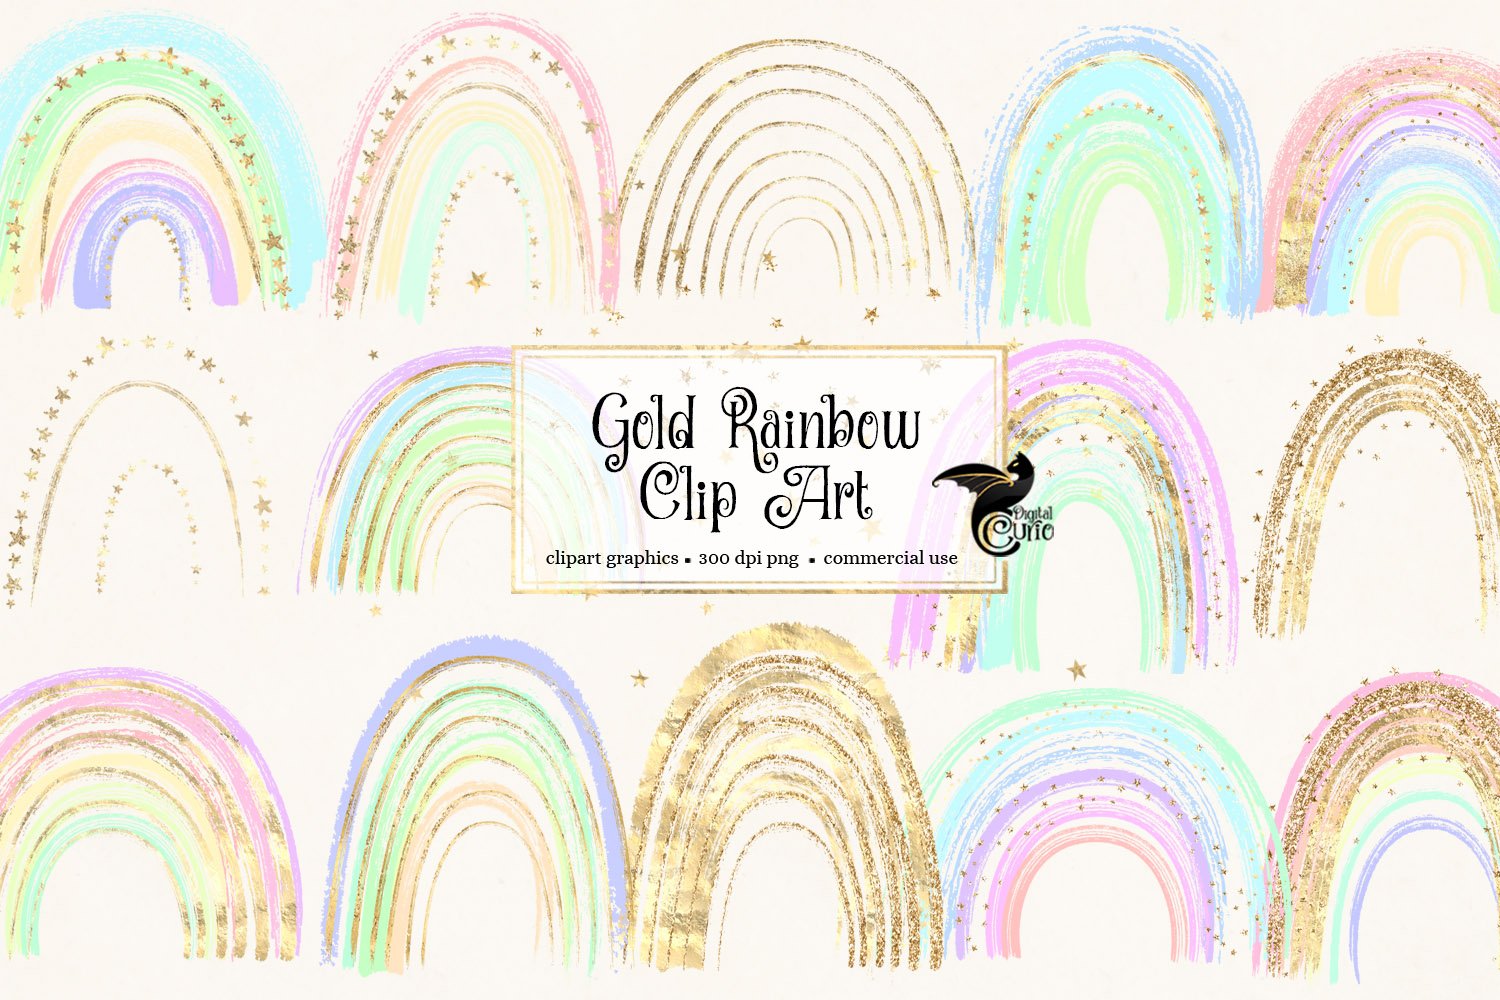 Gold Rainbows Clipart cover image.